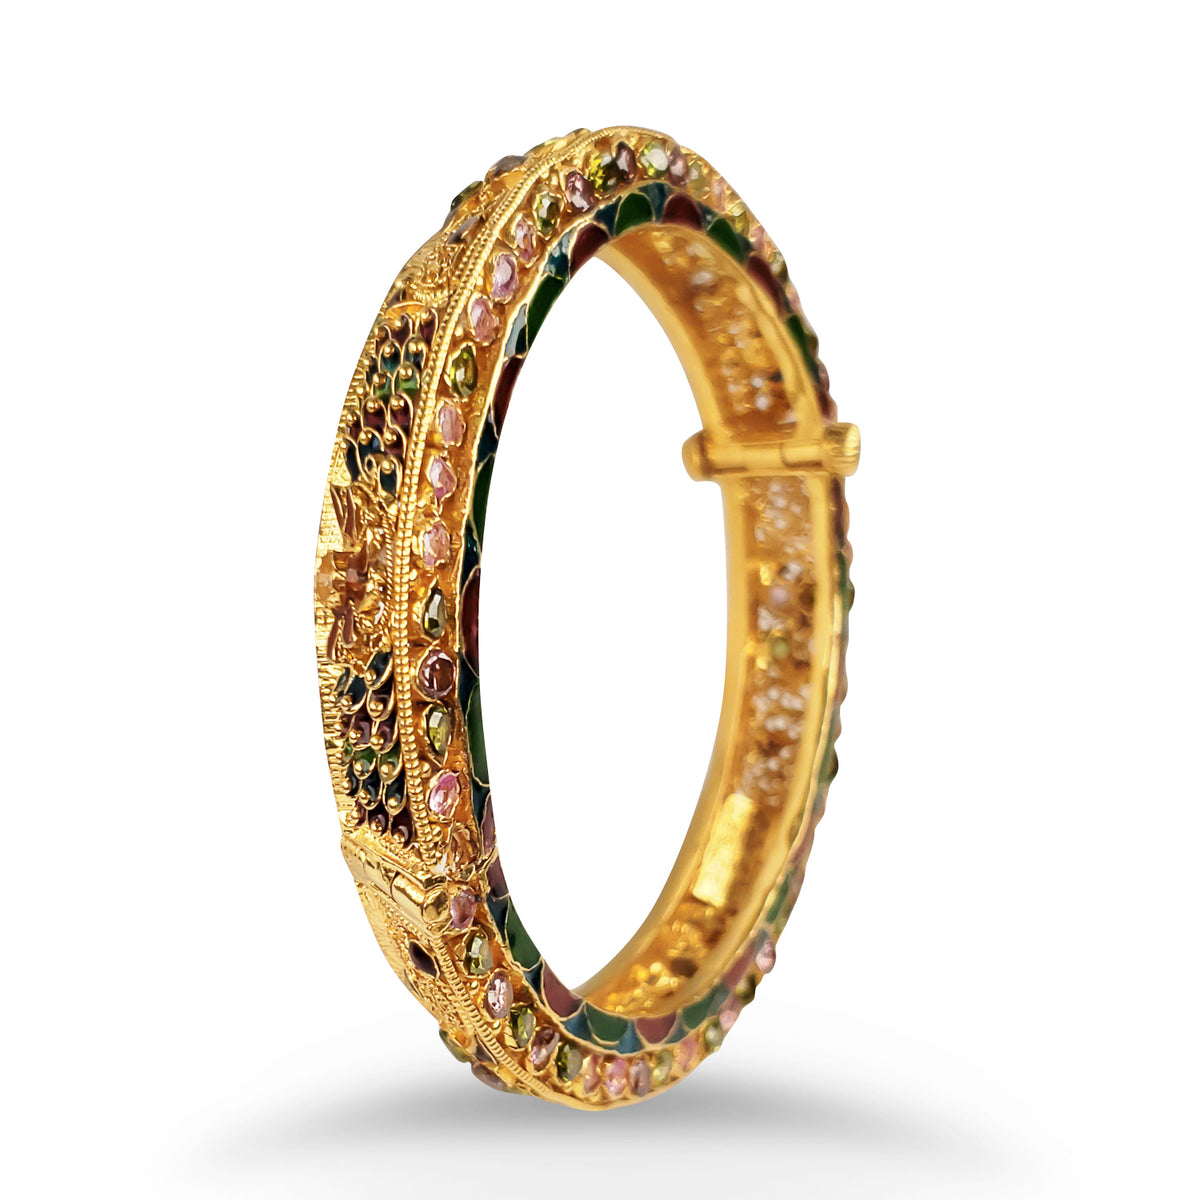 Multi-color stone Bangle Bracelet set in an 18kt yellow gold